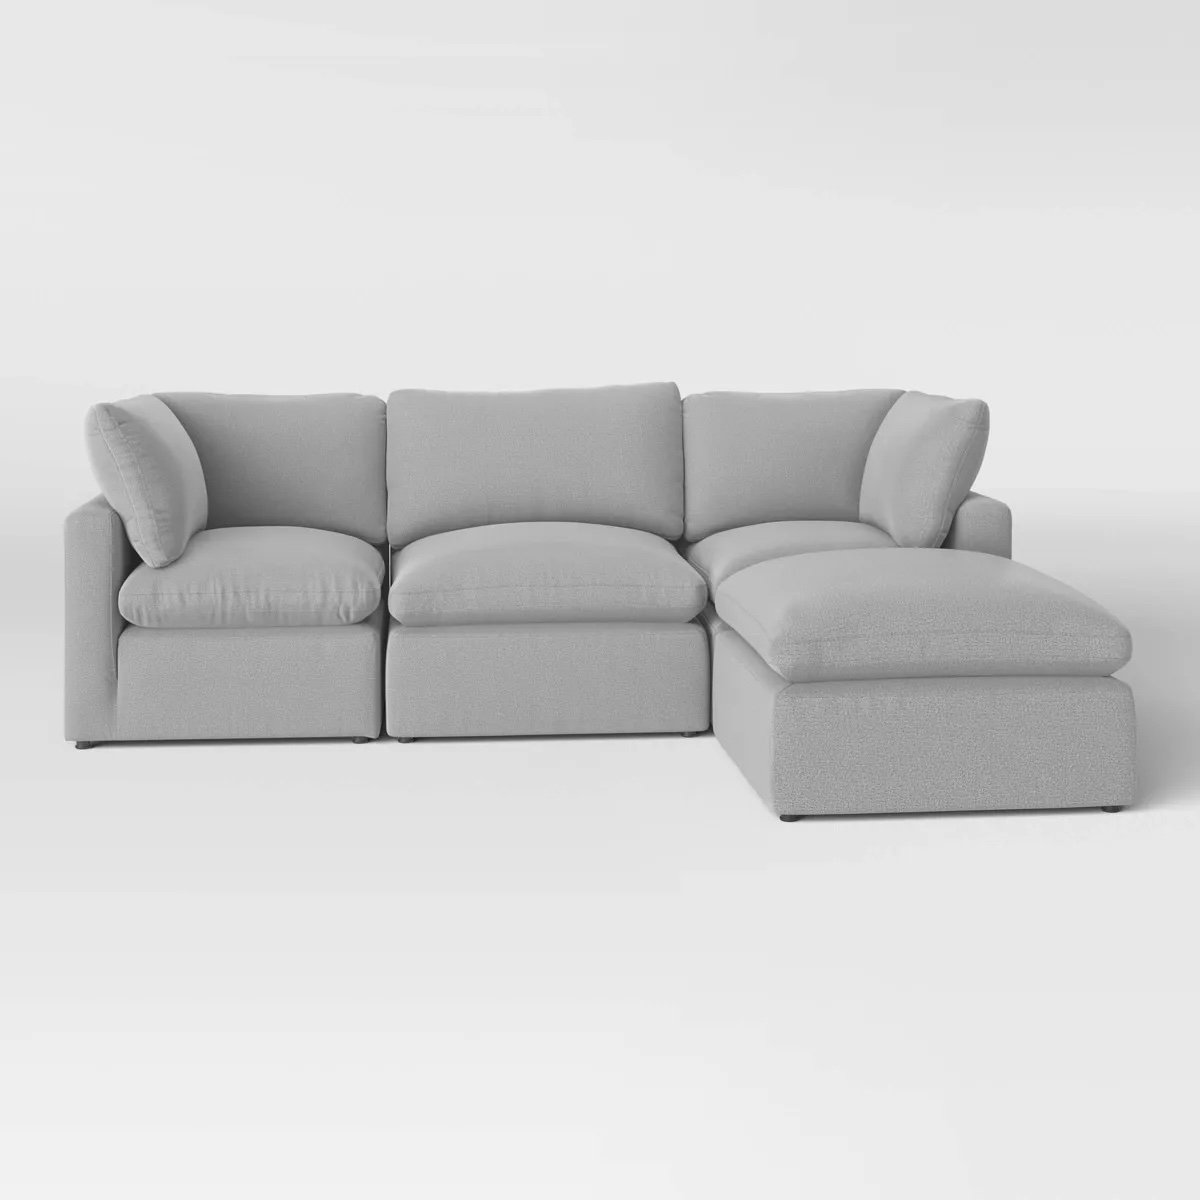 Allandale Sectional Sofa - Project 62